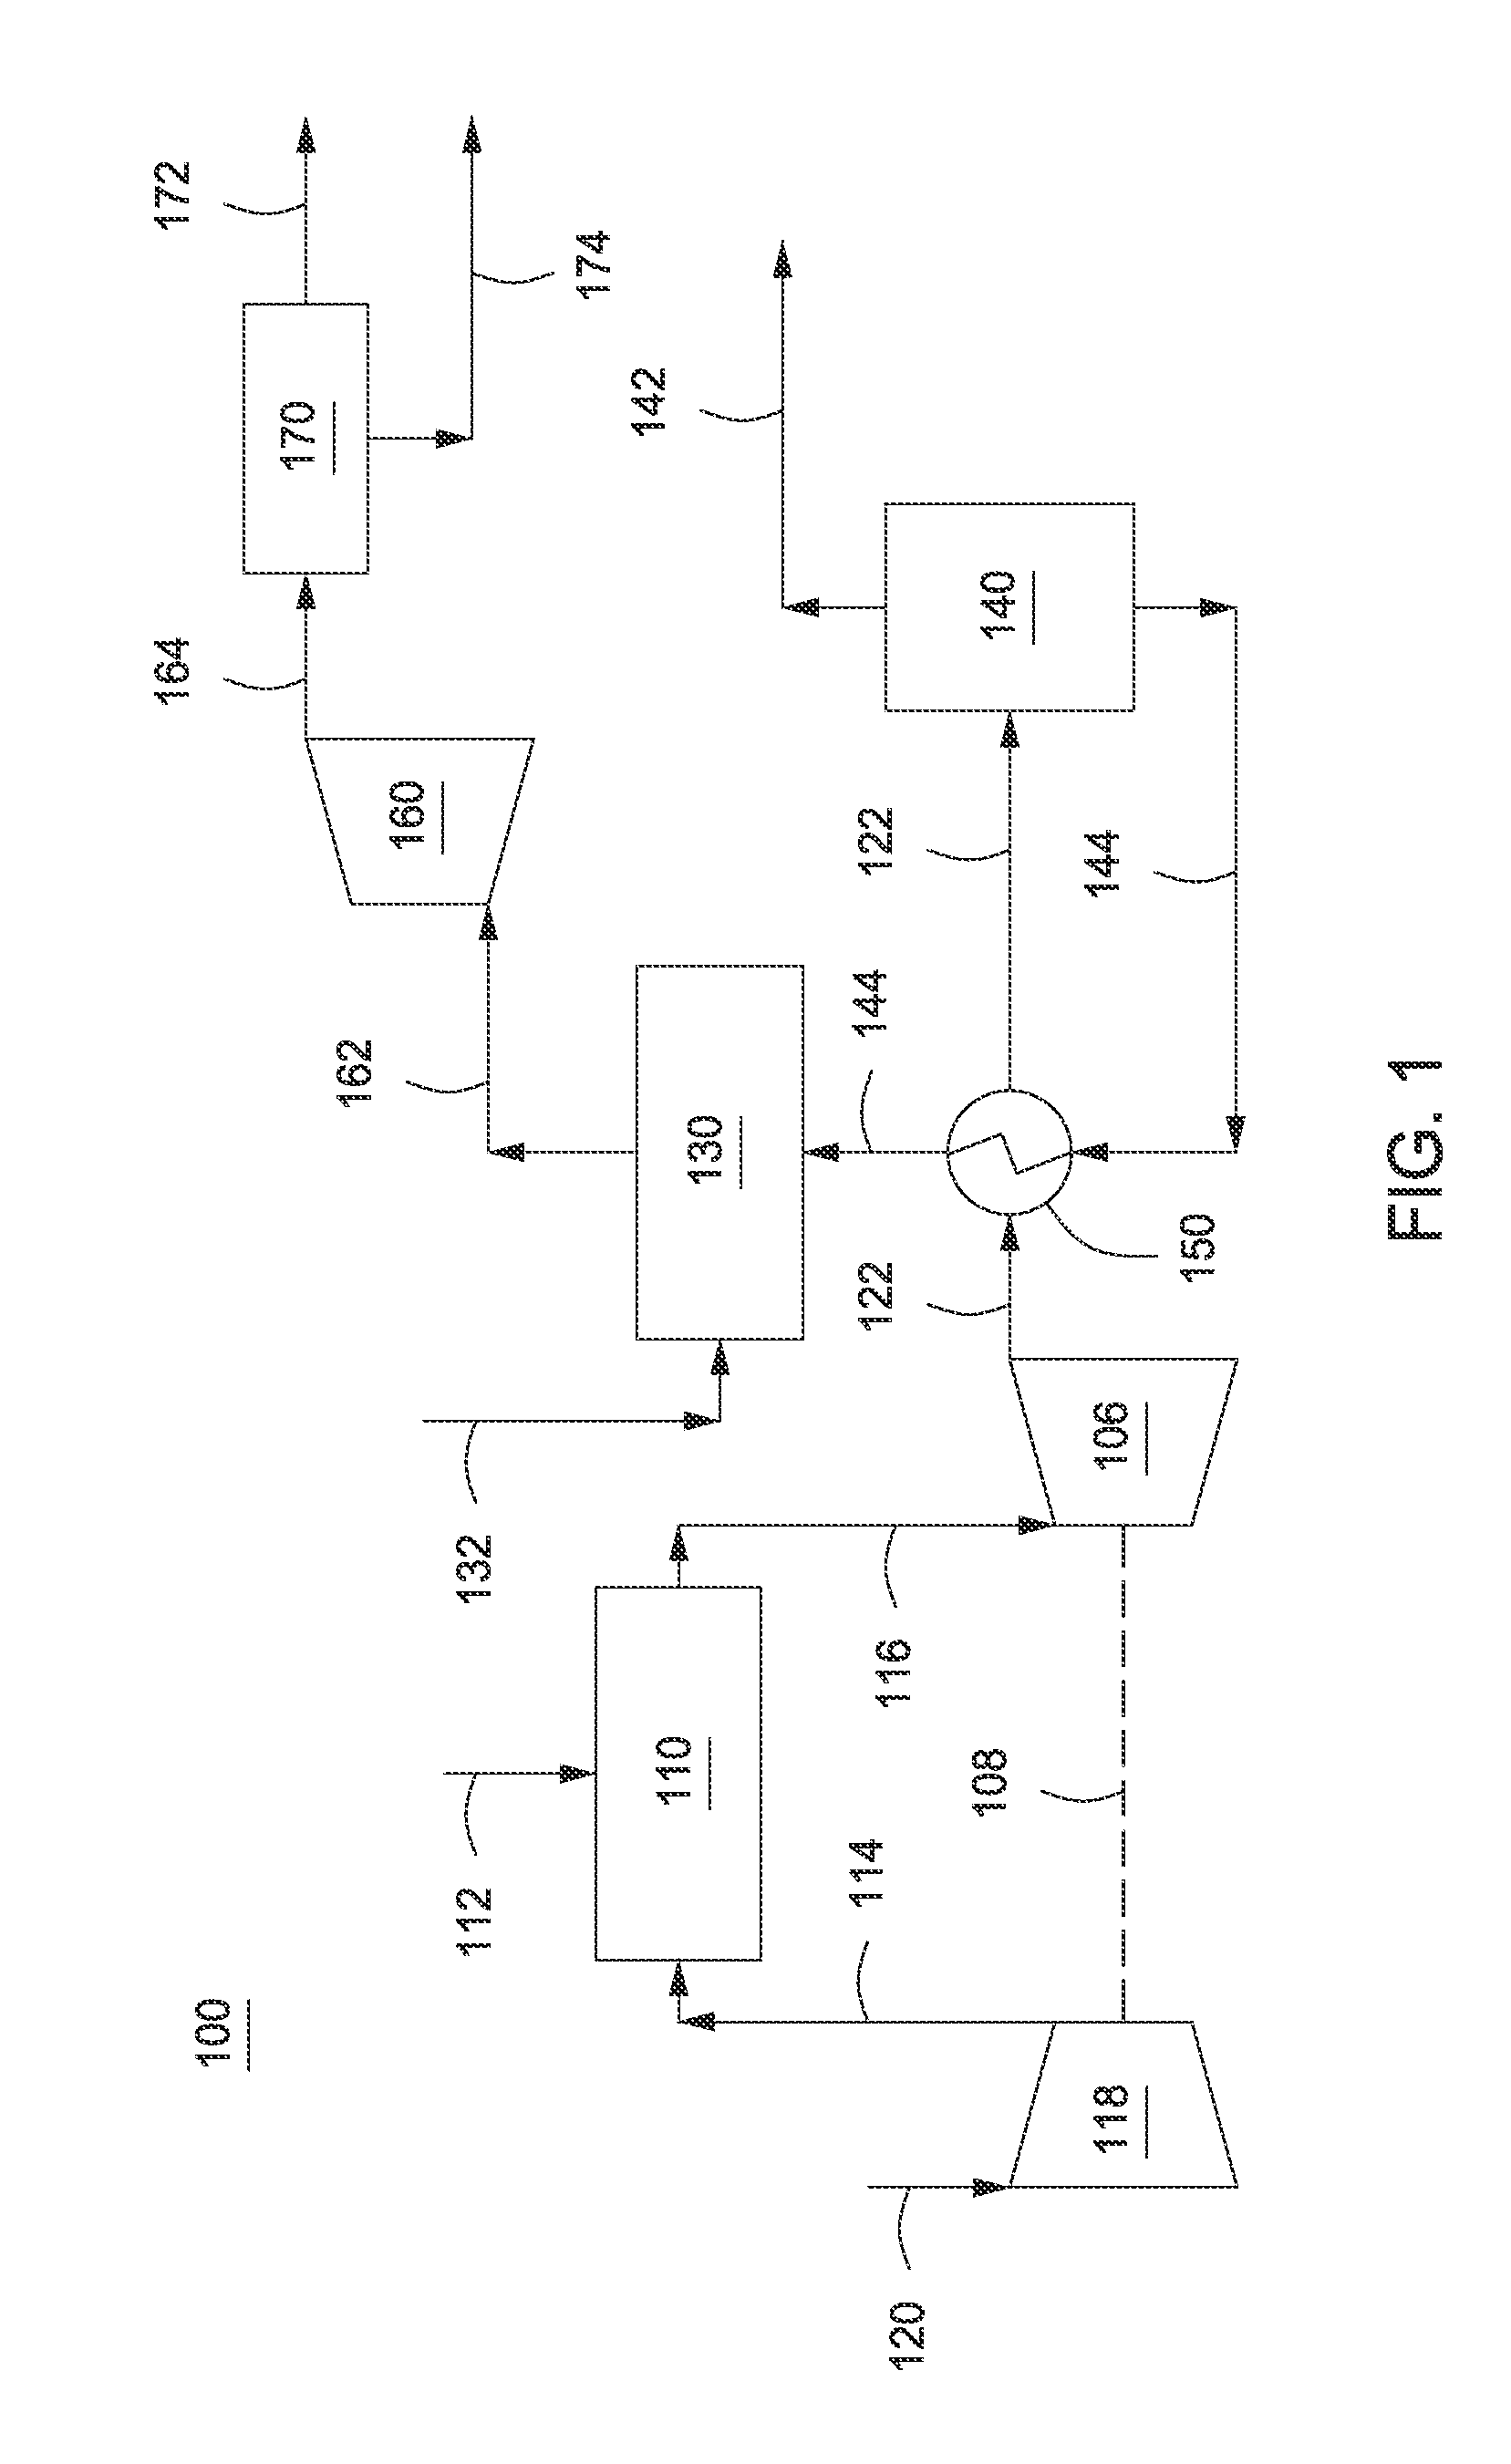 Systems and Methods For Carbon Dioxide Captrue and Power Generation In Low Emission Turbine Systems